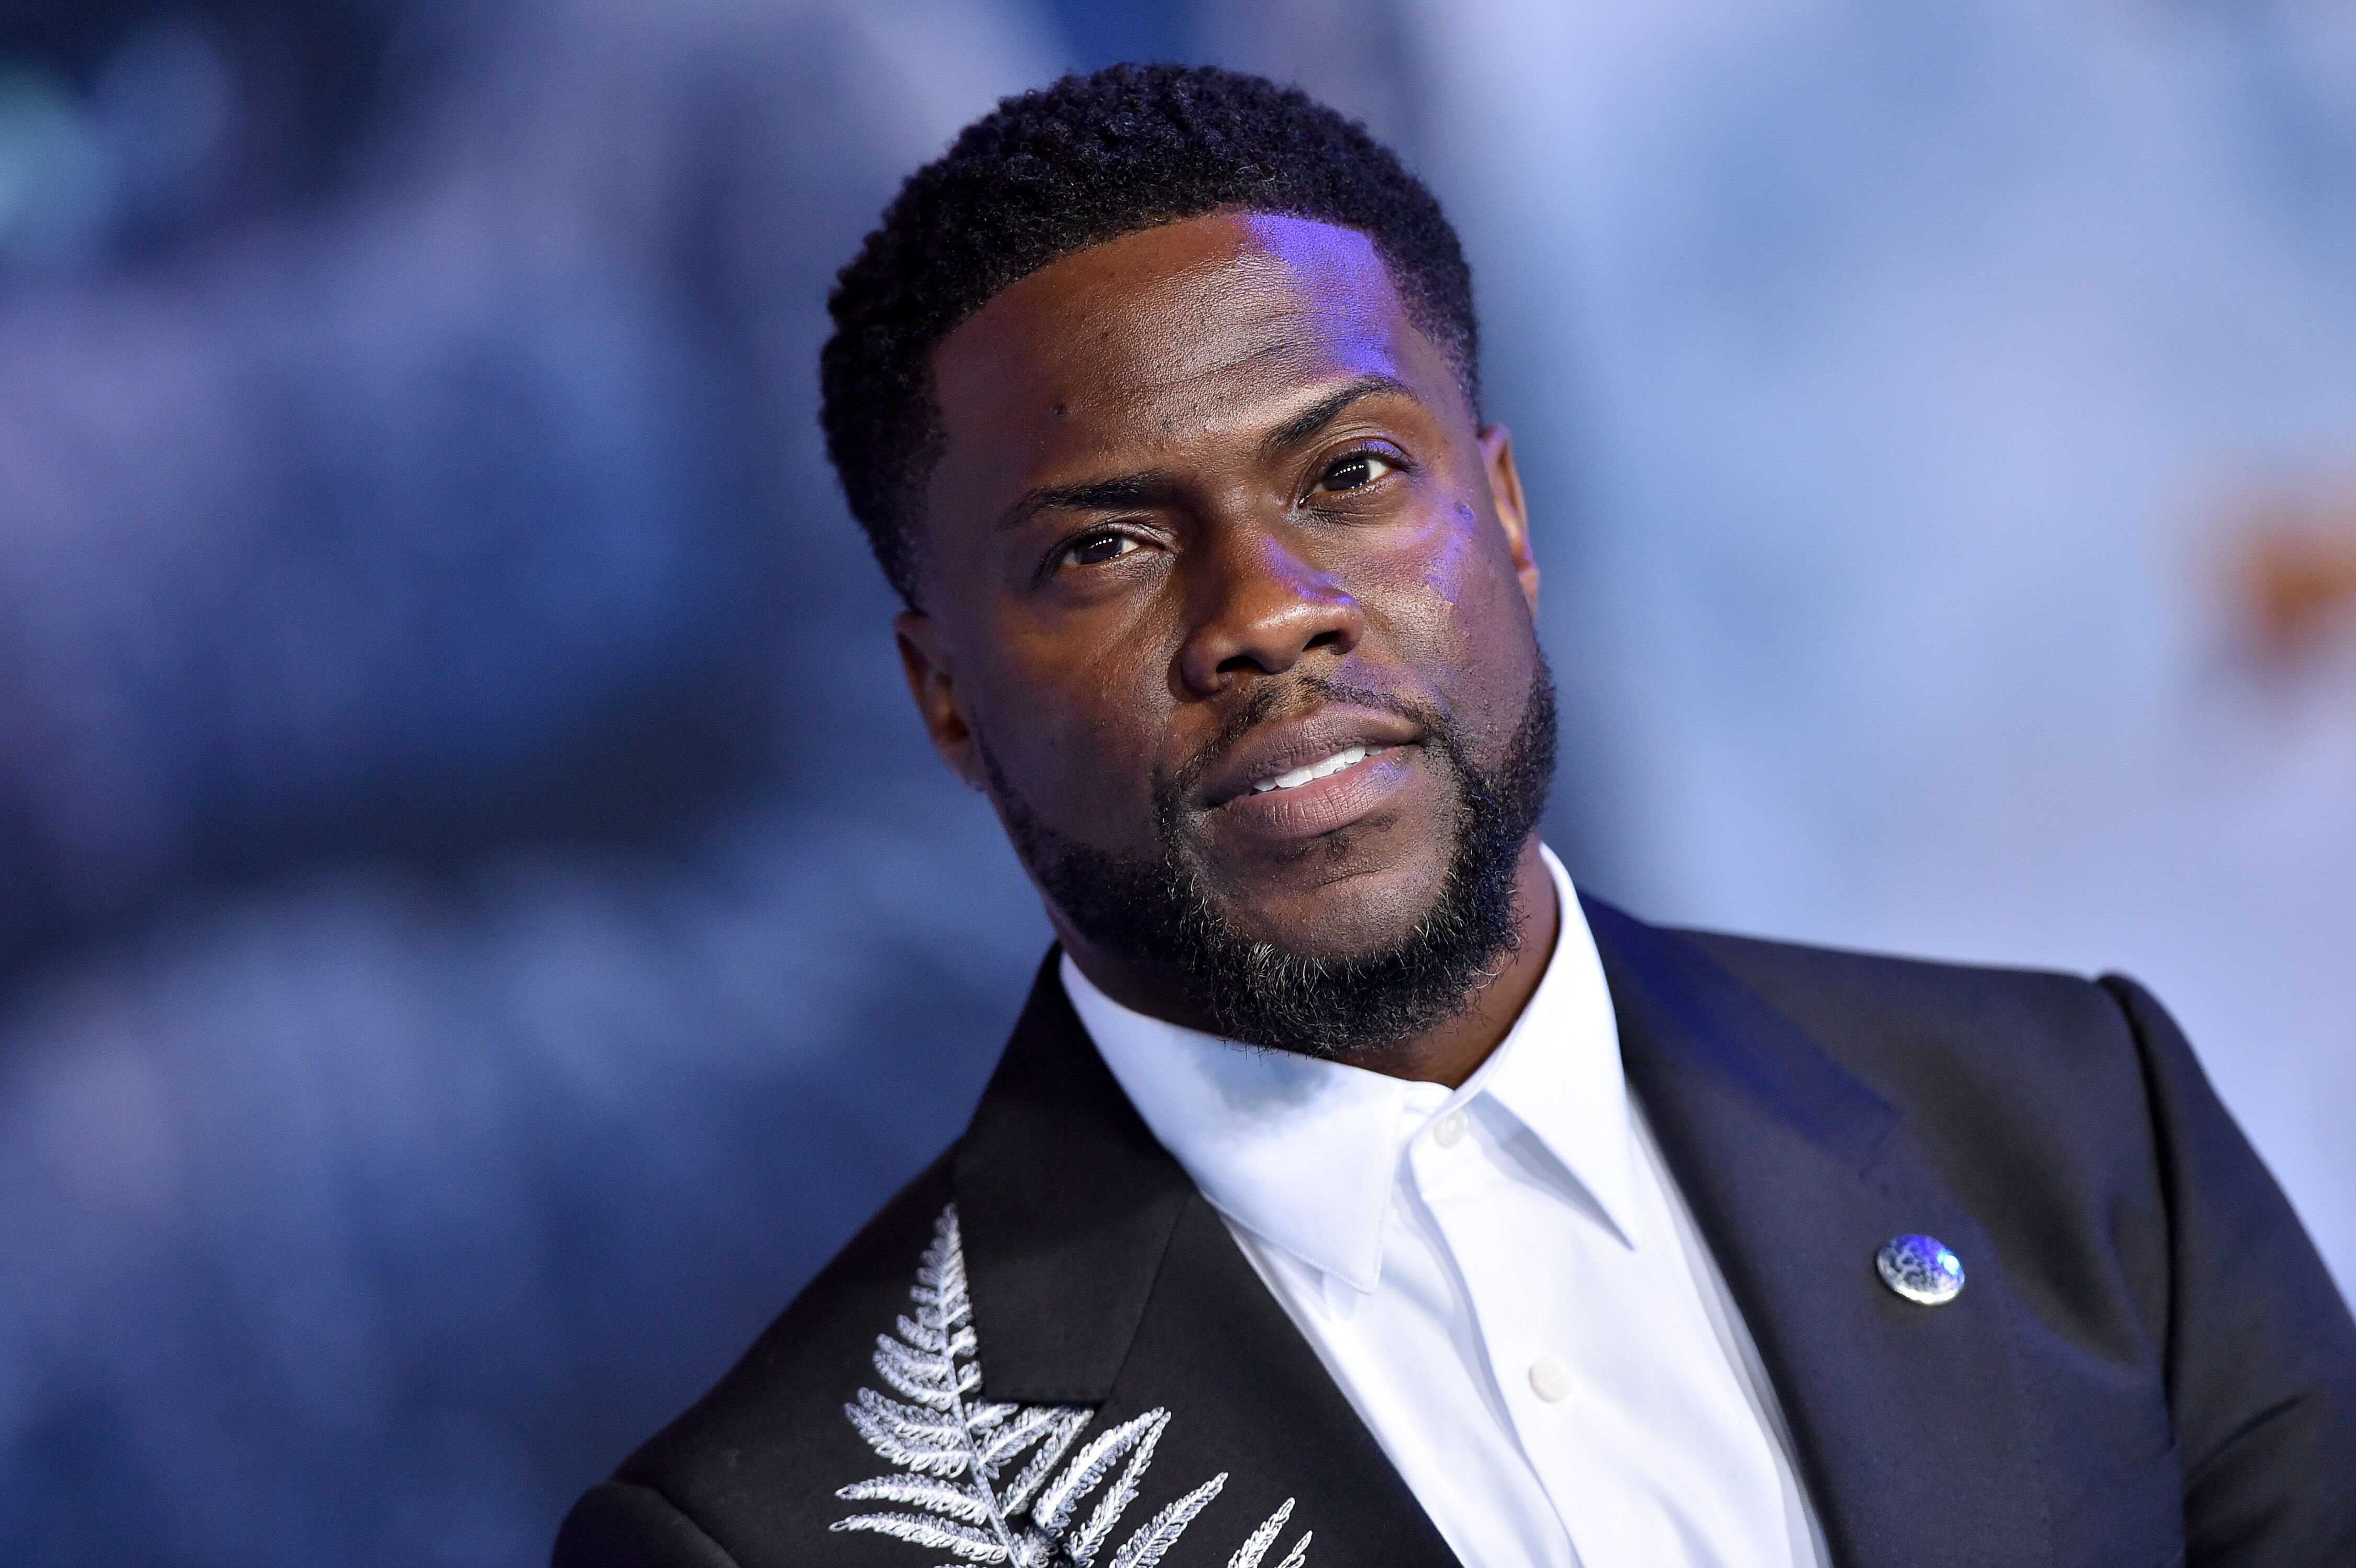 Kevin Hart at the premiere of Sony Pictures' "Jumanji: The Next Level" on December 09, 2019 | Photo: Getty Images